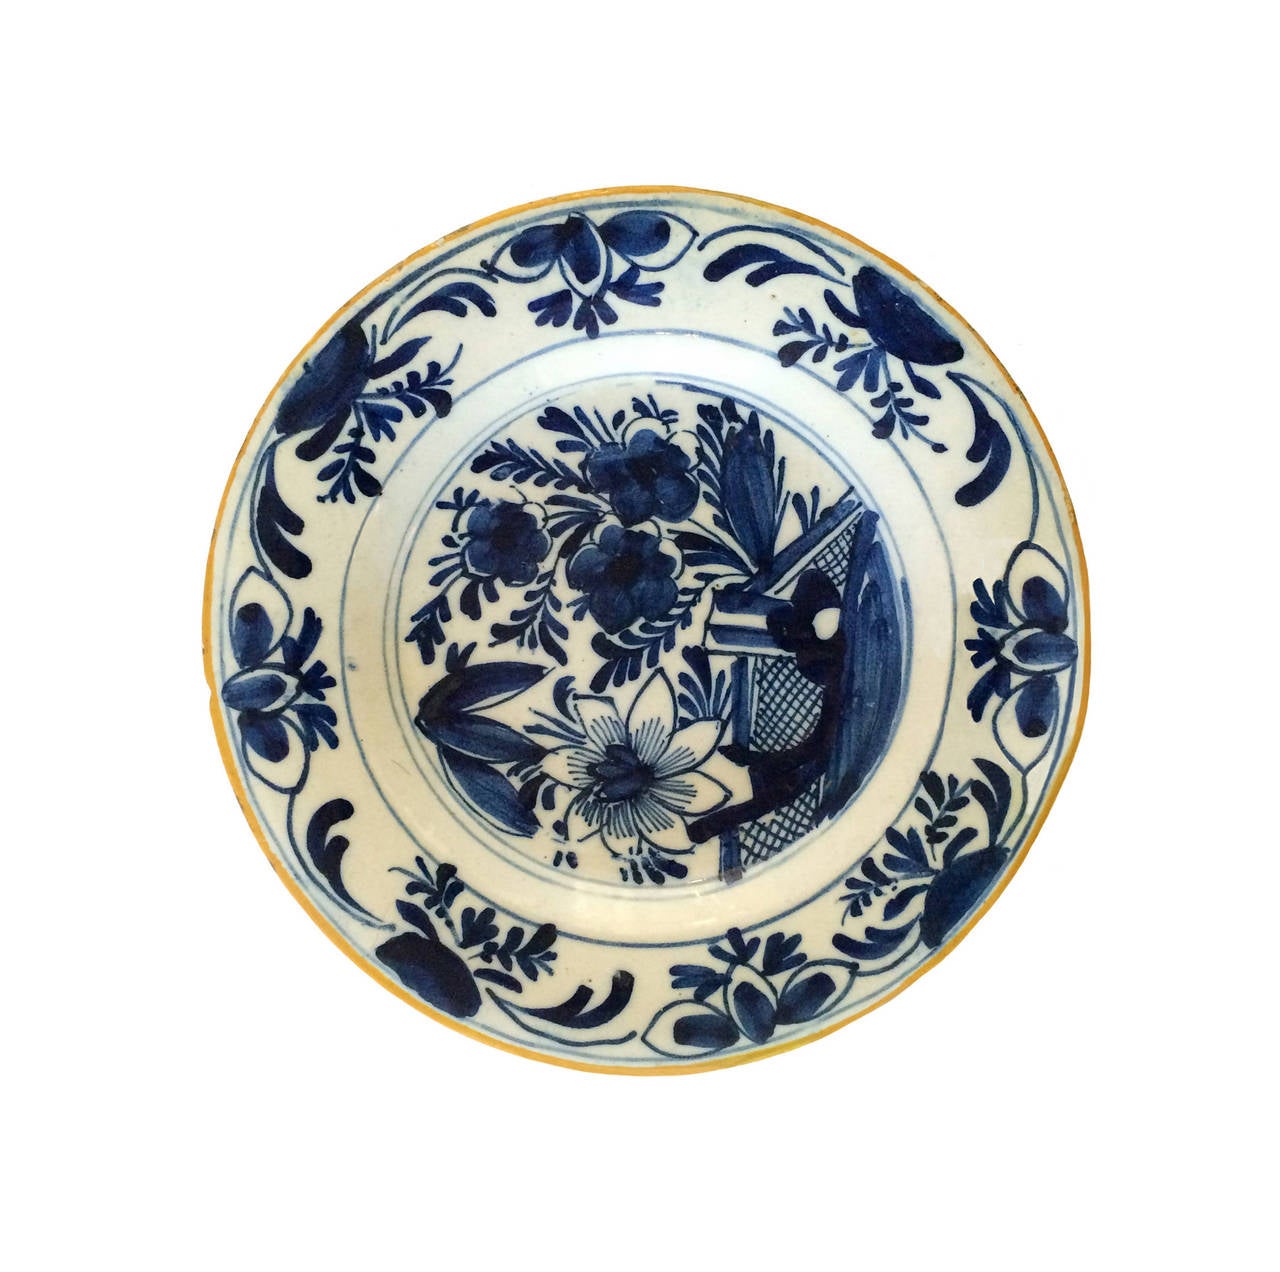 18th century blue and white Delft plate; floral center with a yellow border.